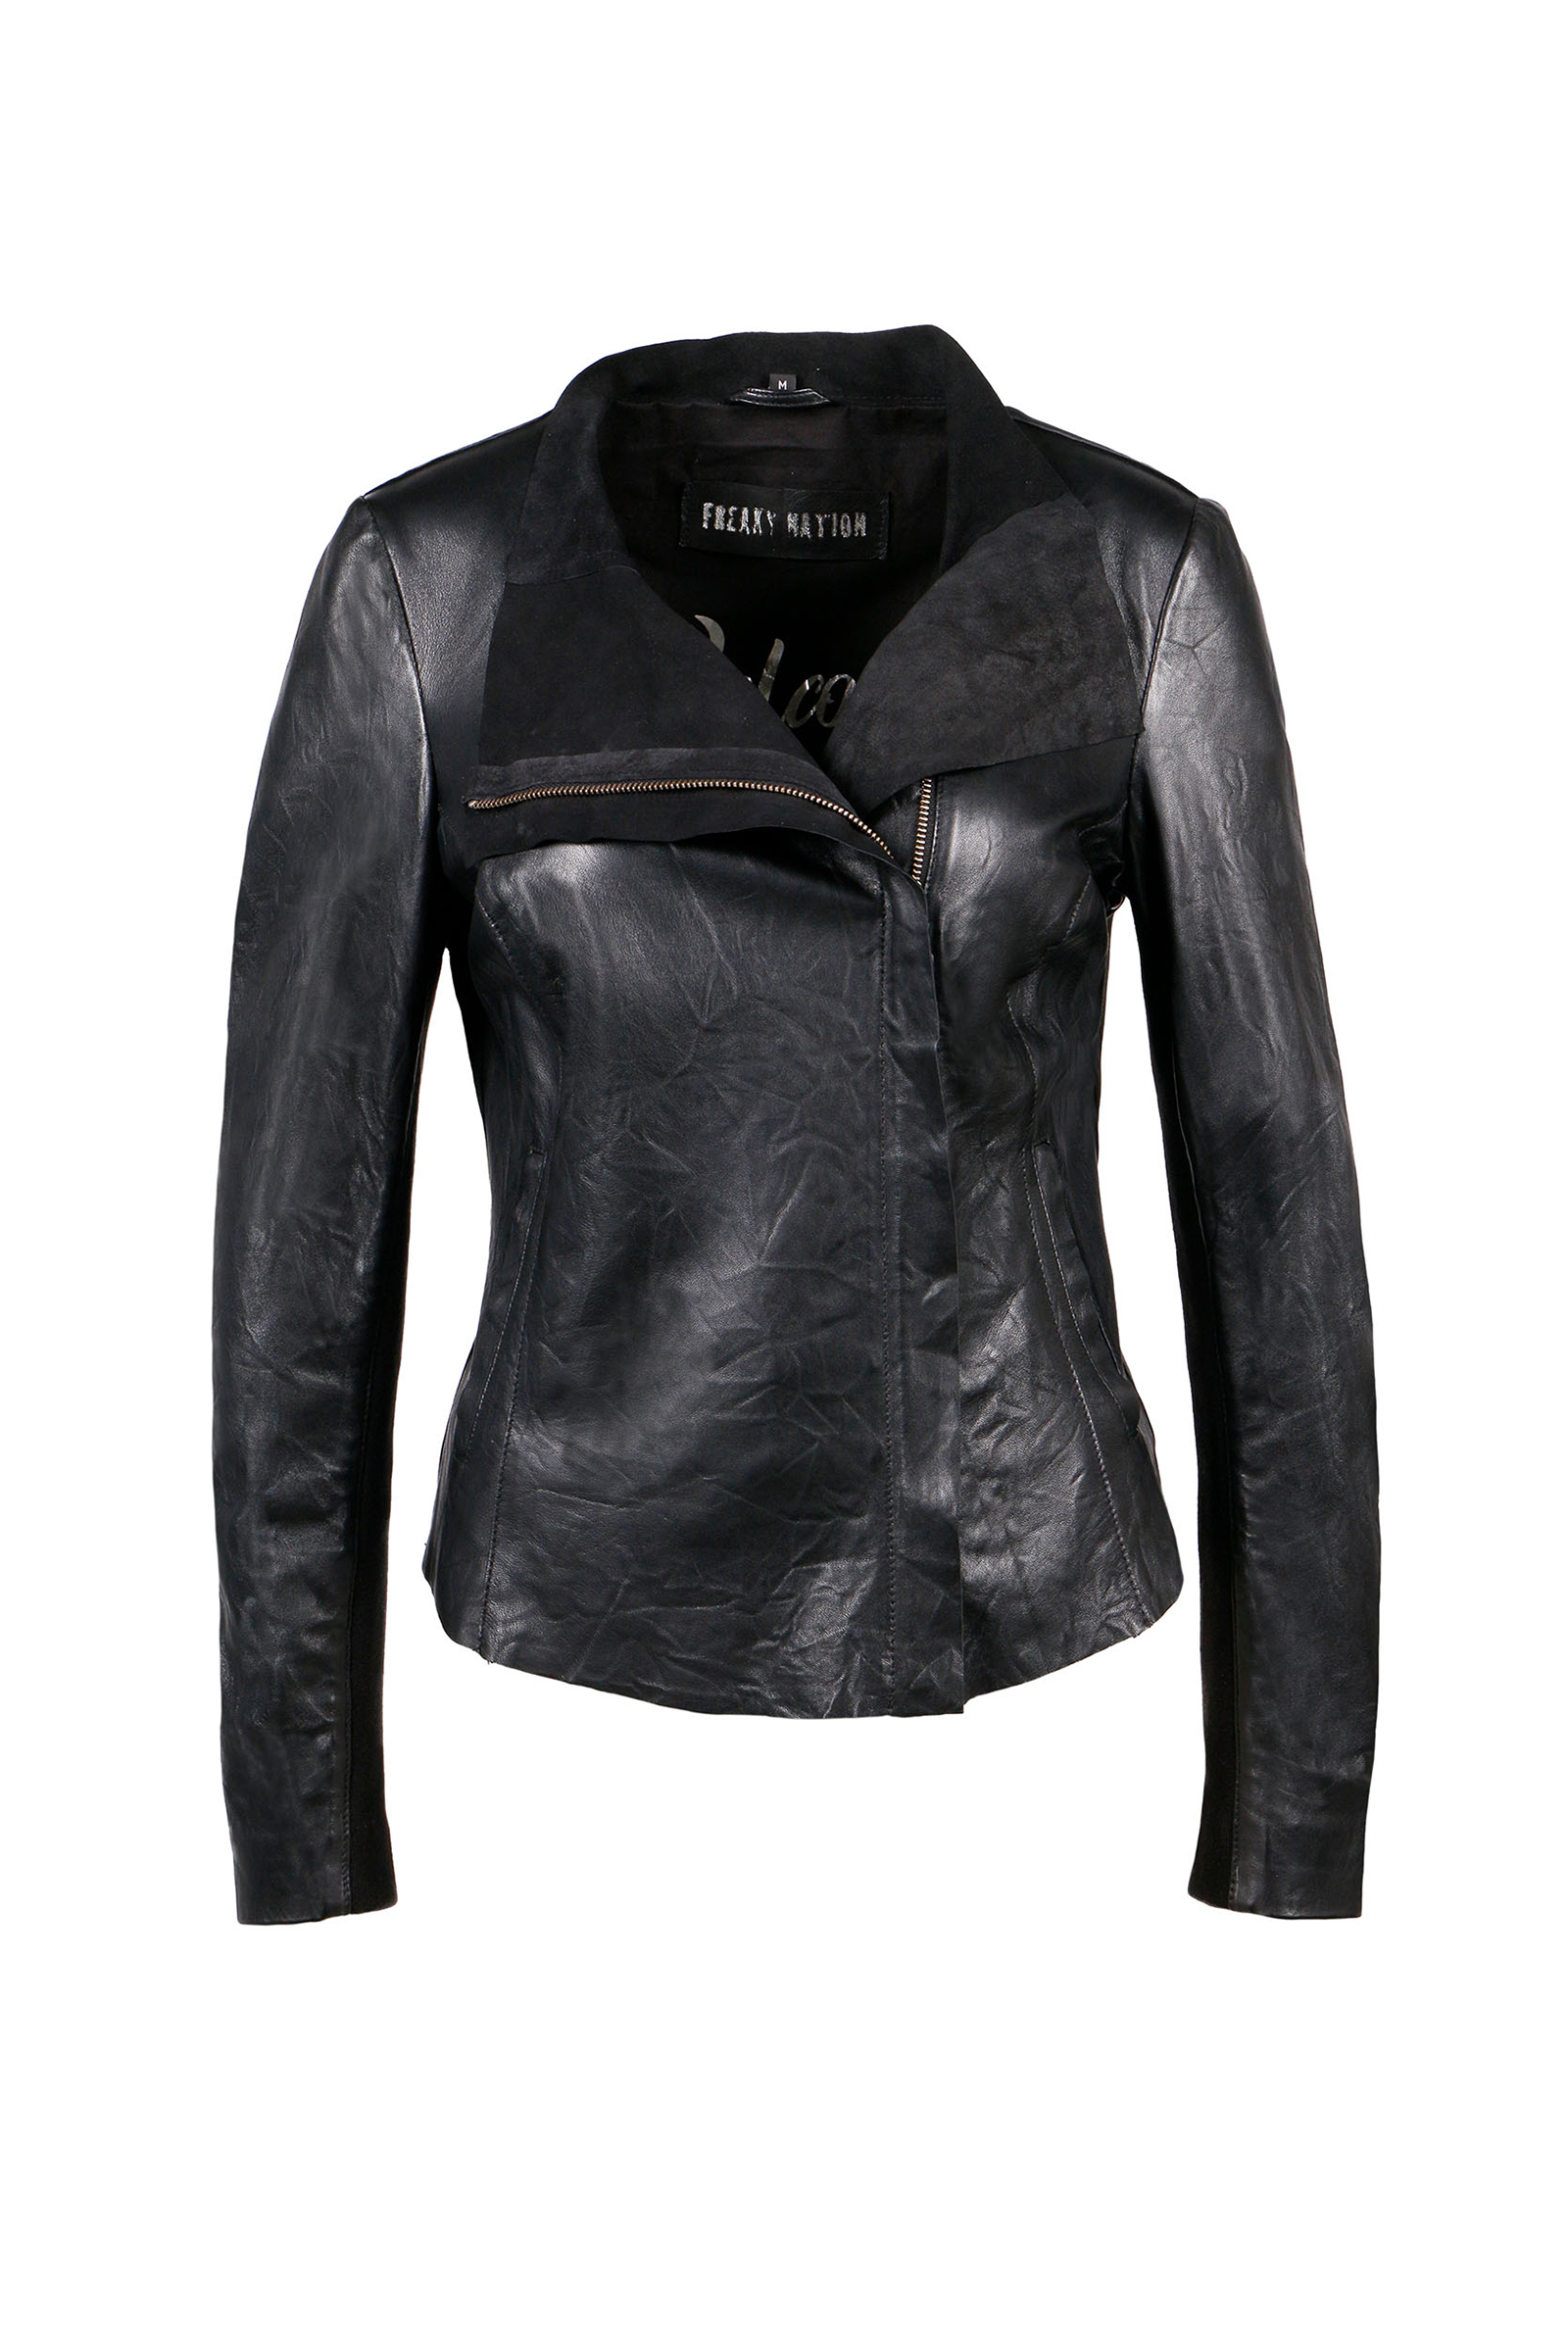 New Blow up 1-FN | Leather Jackets | Women | Freaky Nation